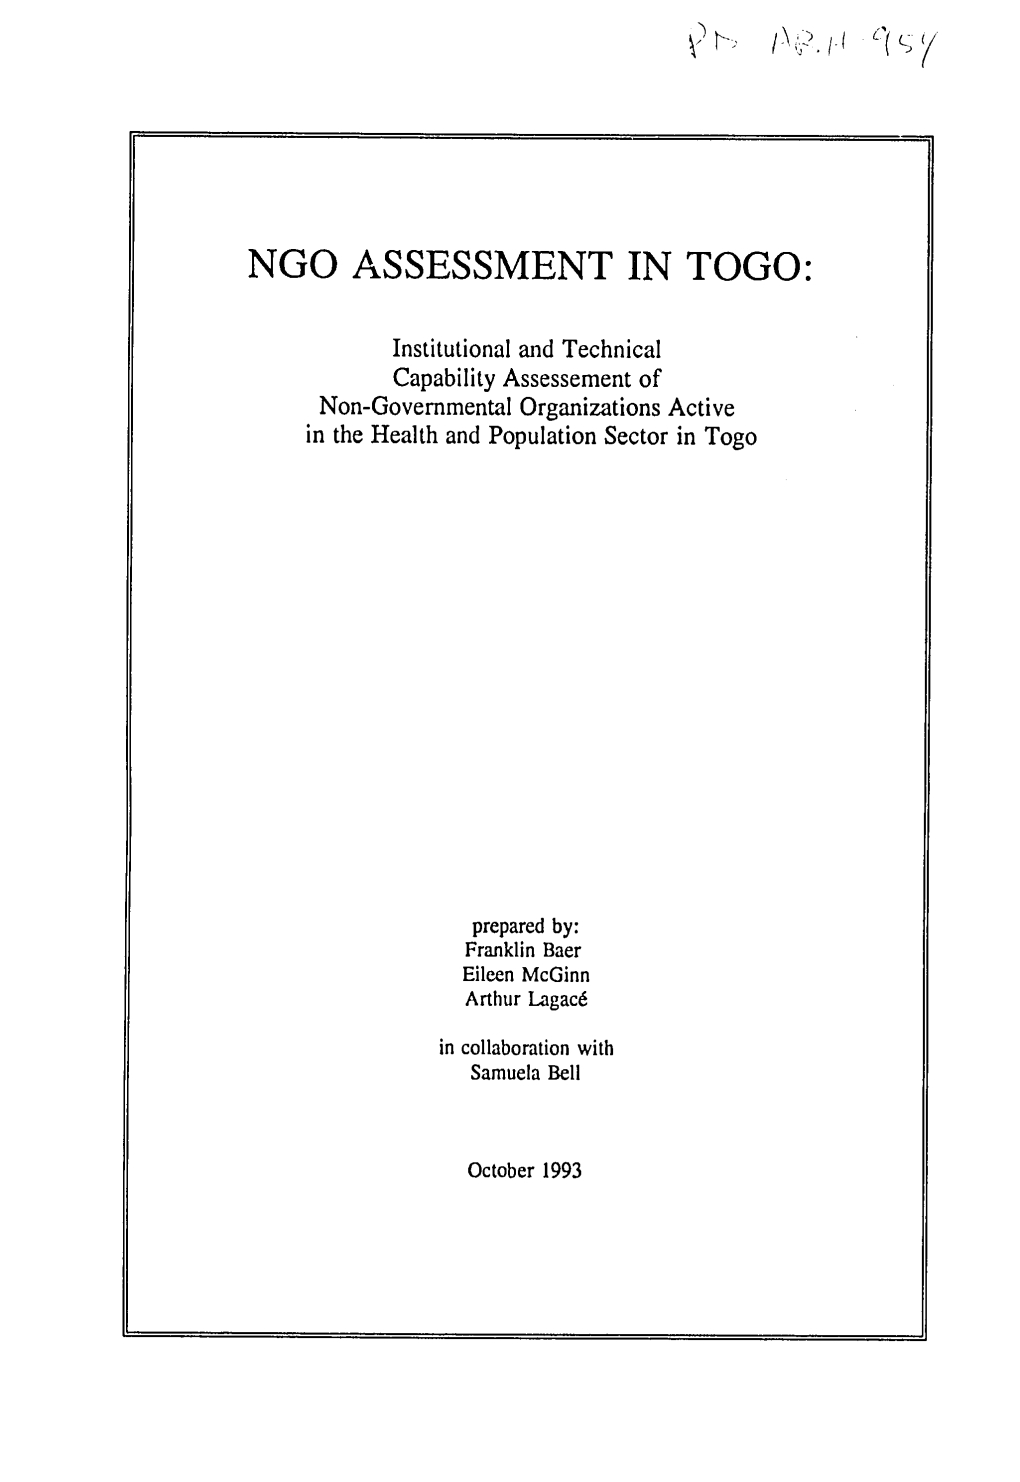 Ngo Assessment in Togo